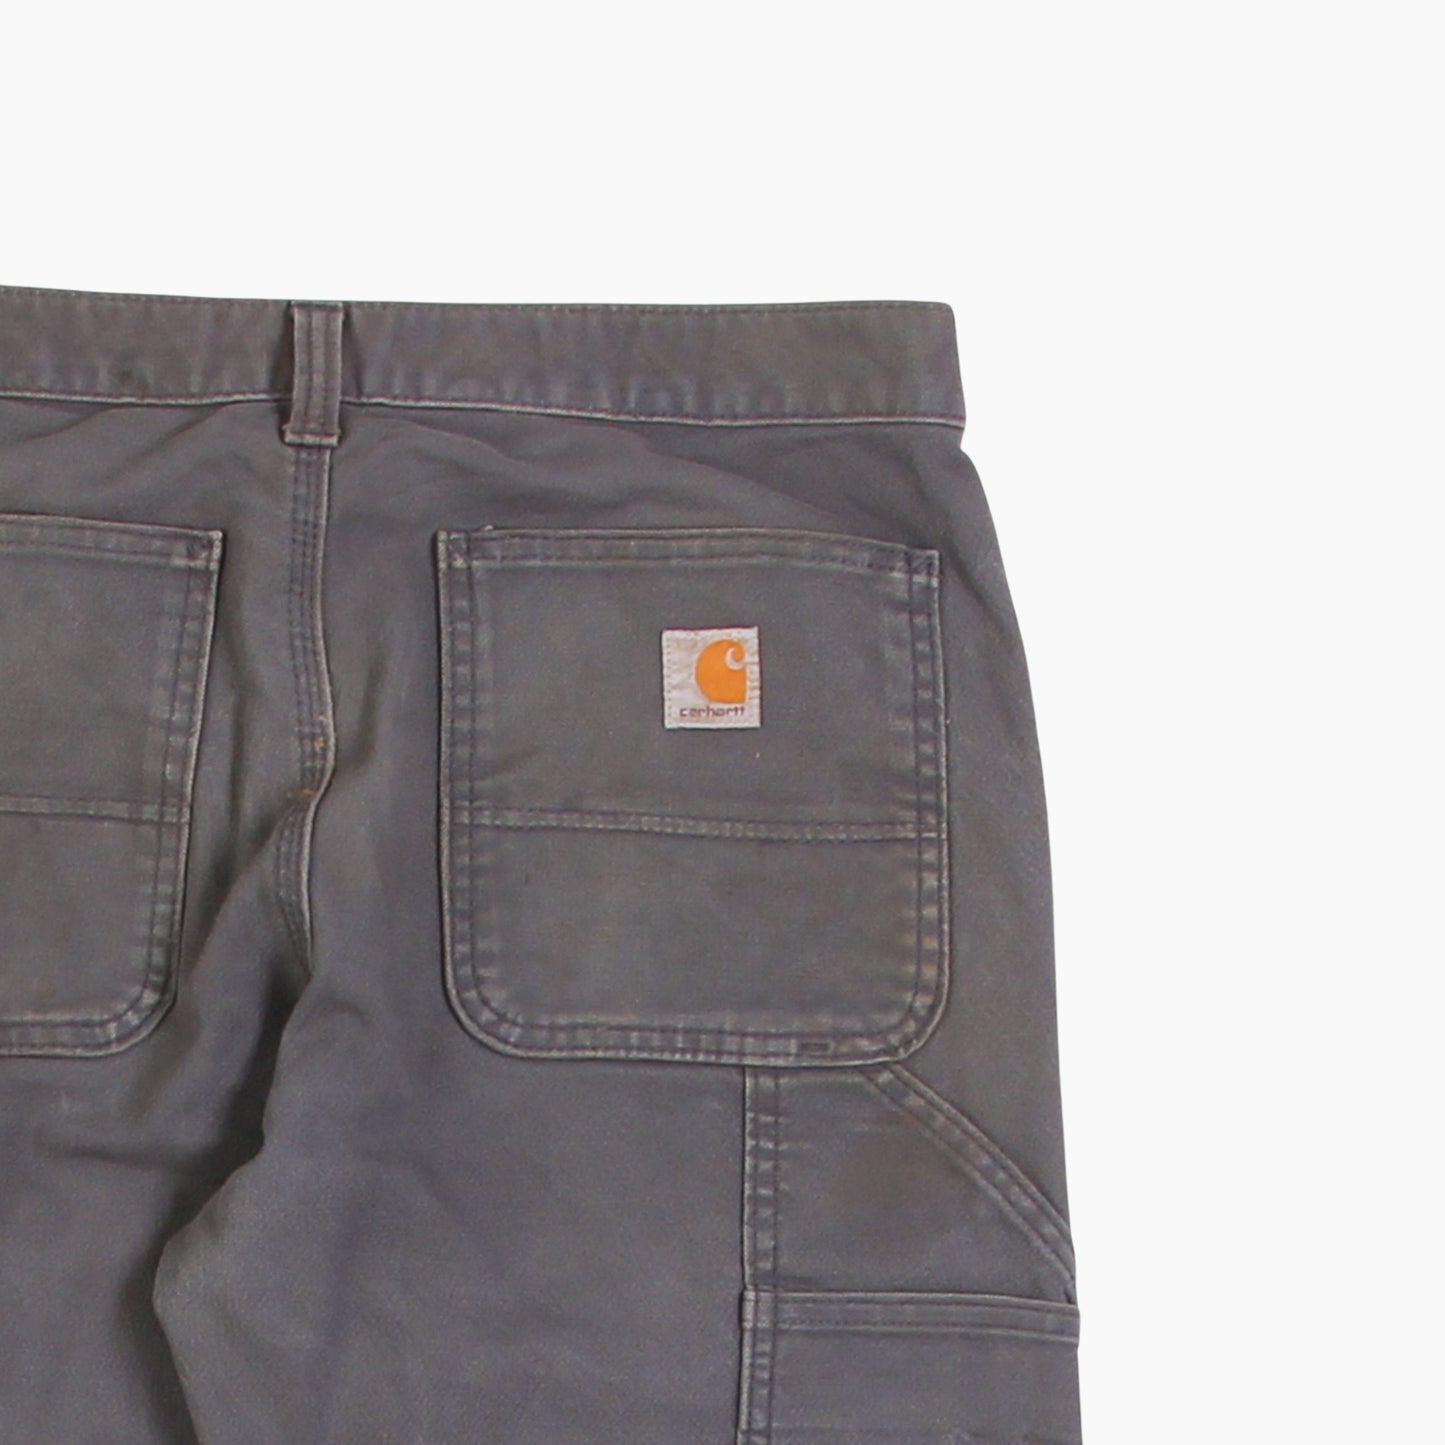 Vintage Double Knee Carpenter Pants - Grey - 31/30 - American Madness